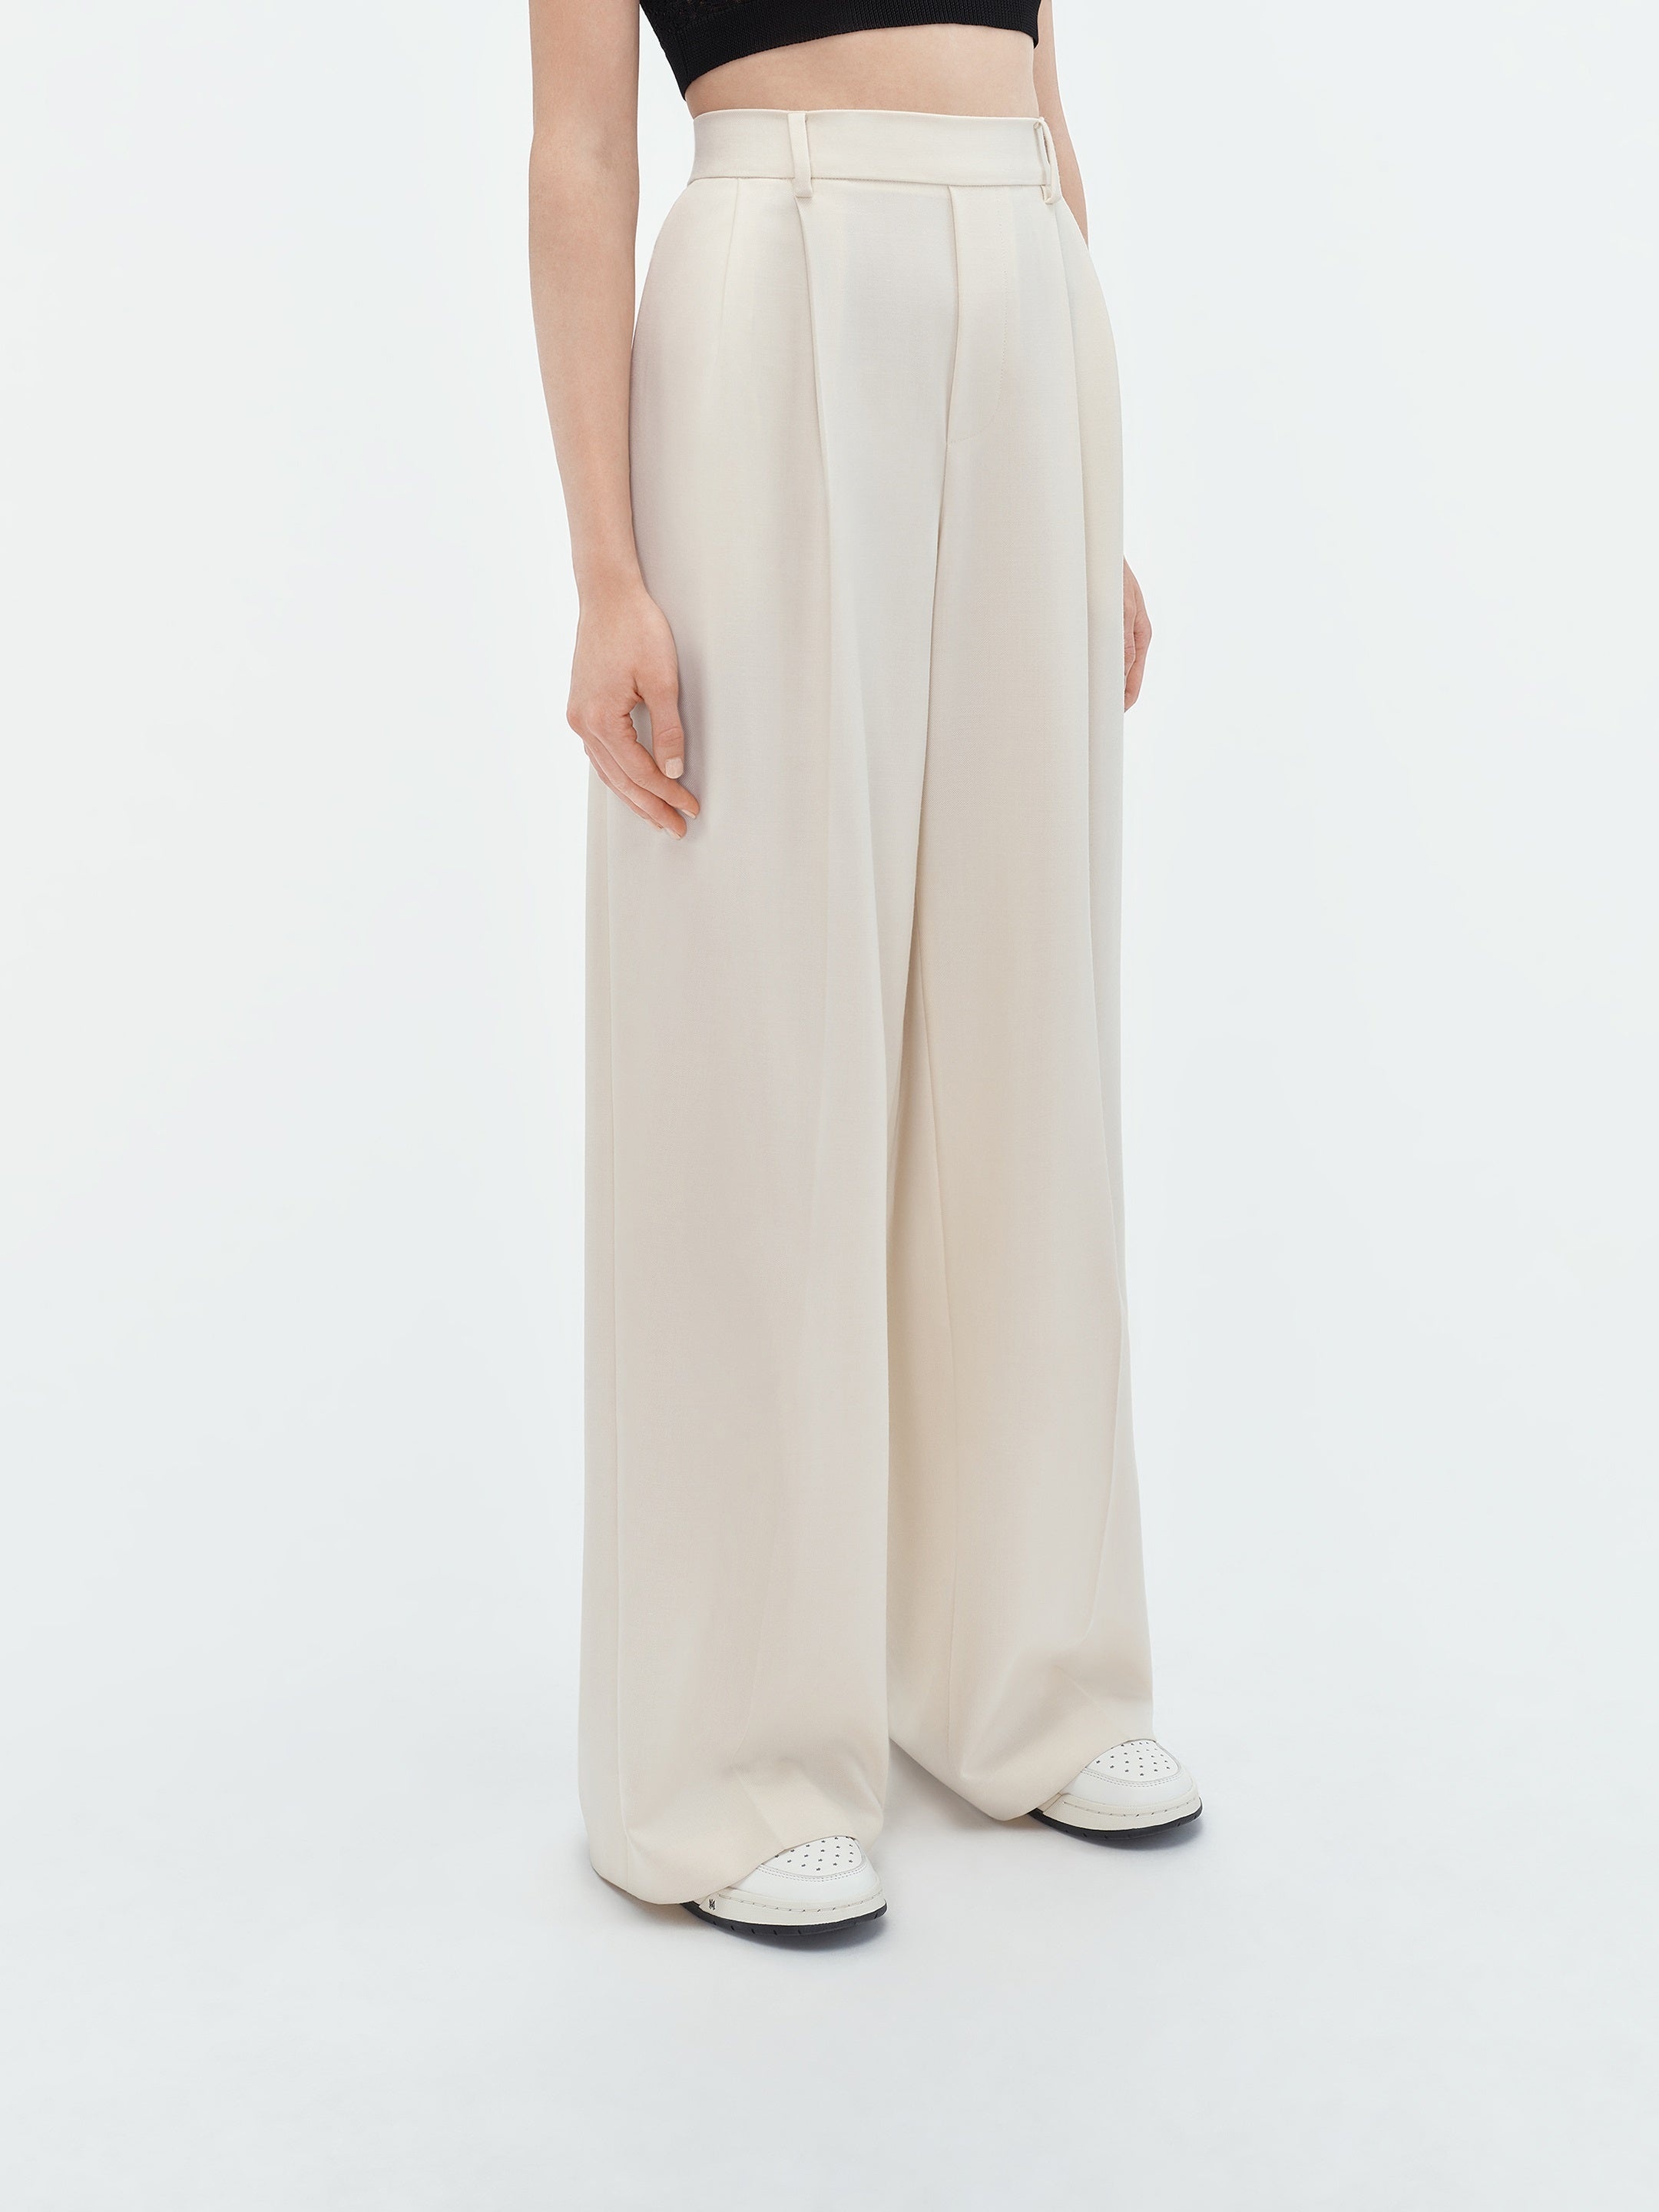 RELAXED DOUBLE PLEATED PANT - 4